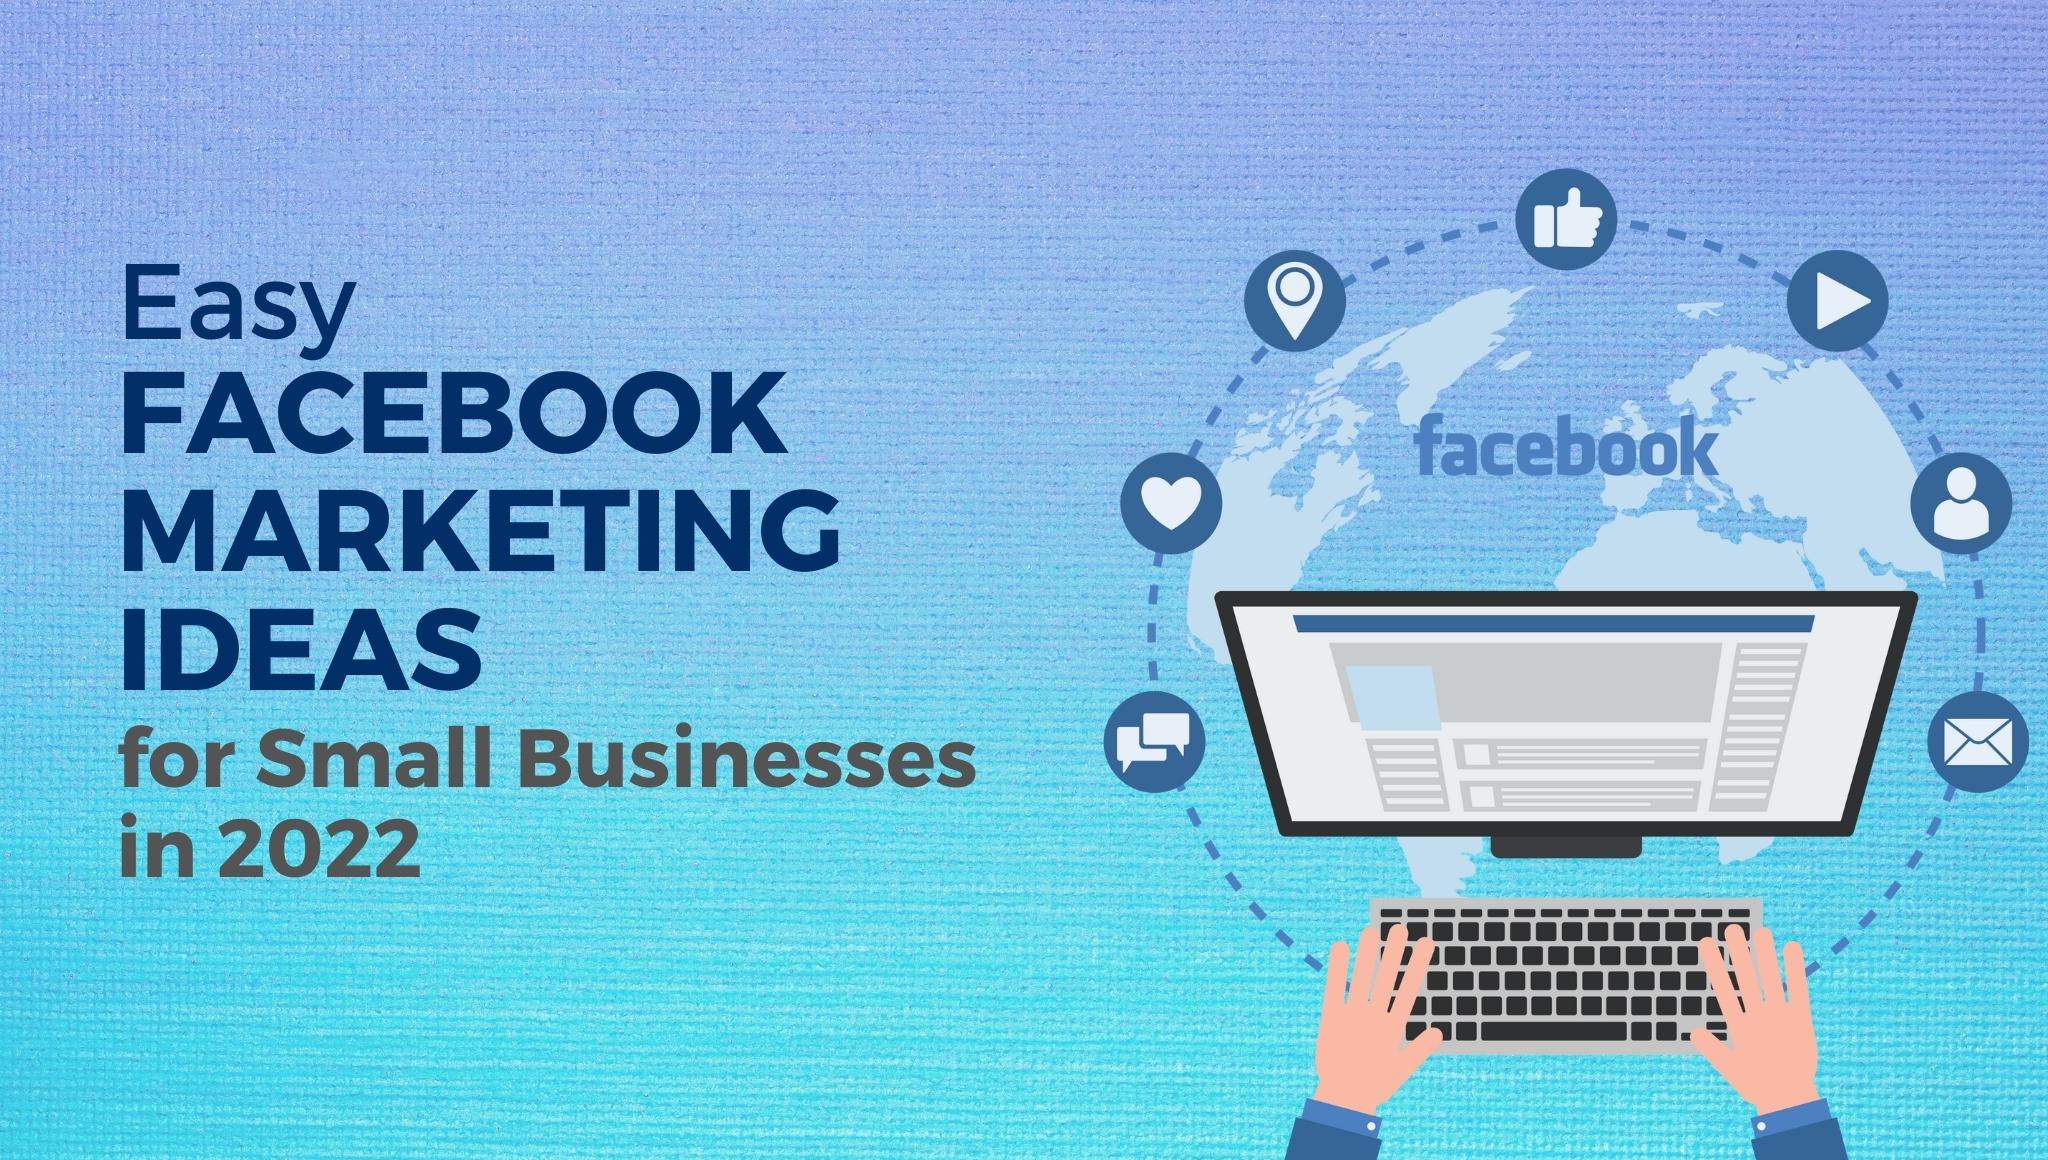 Easy Facebook Marketing Ideas for Small Businesses in 2022